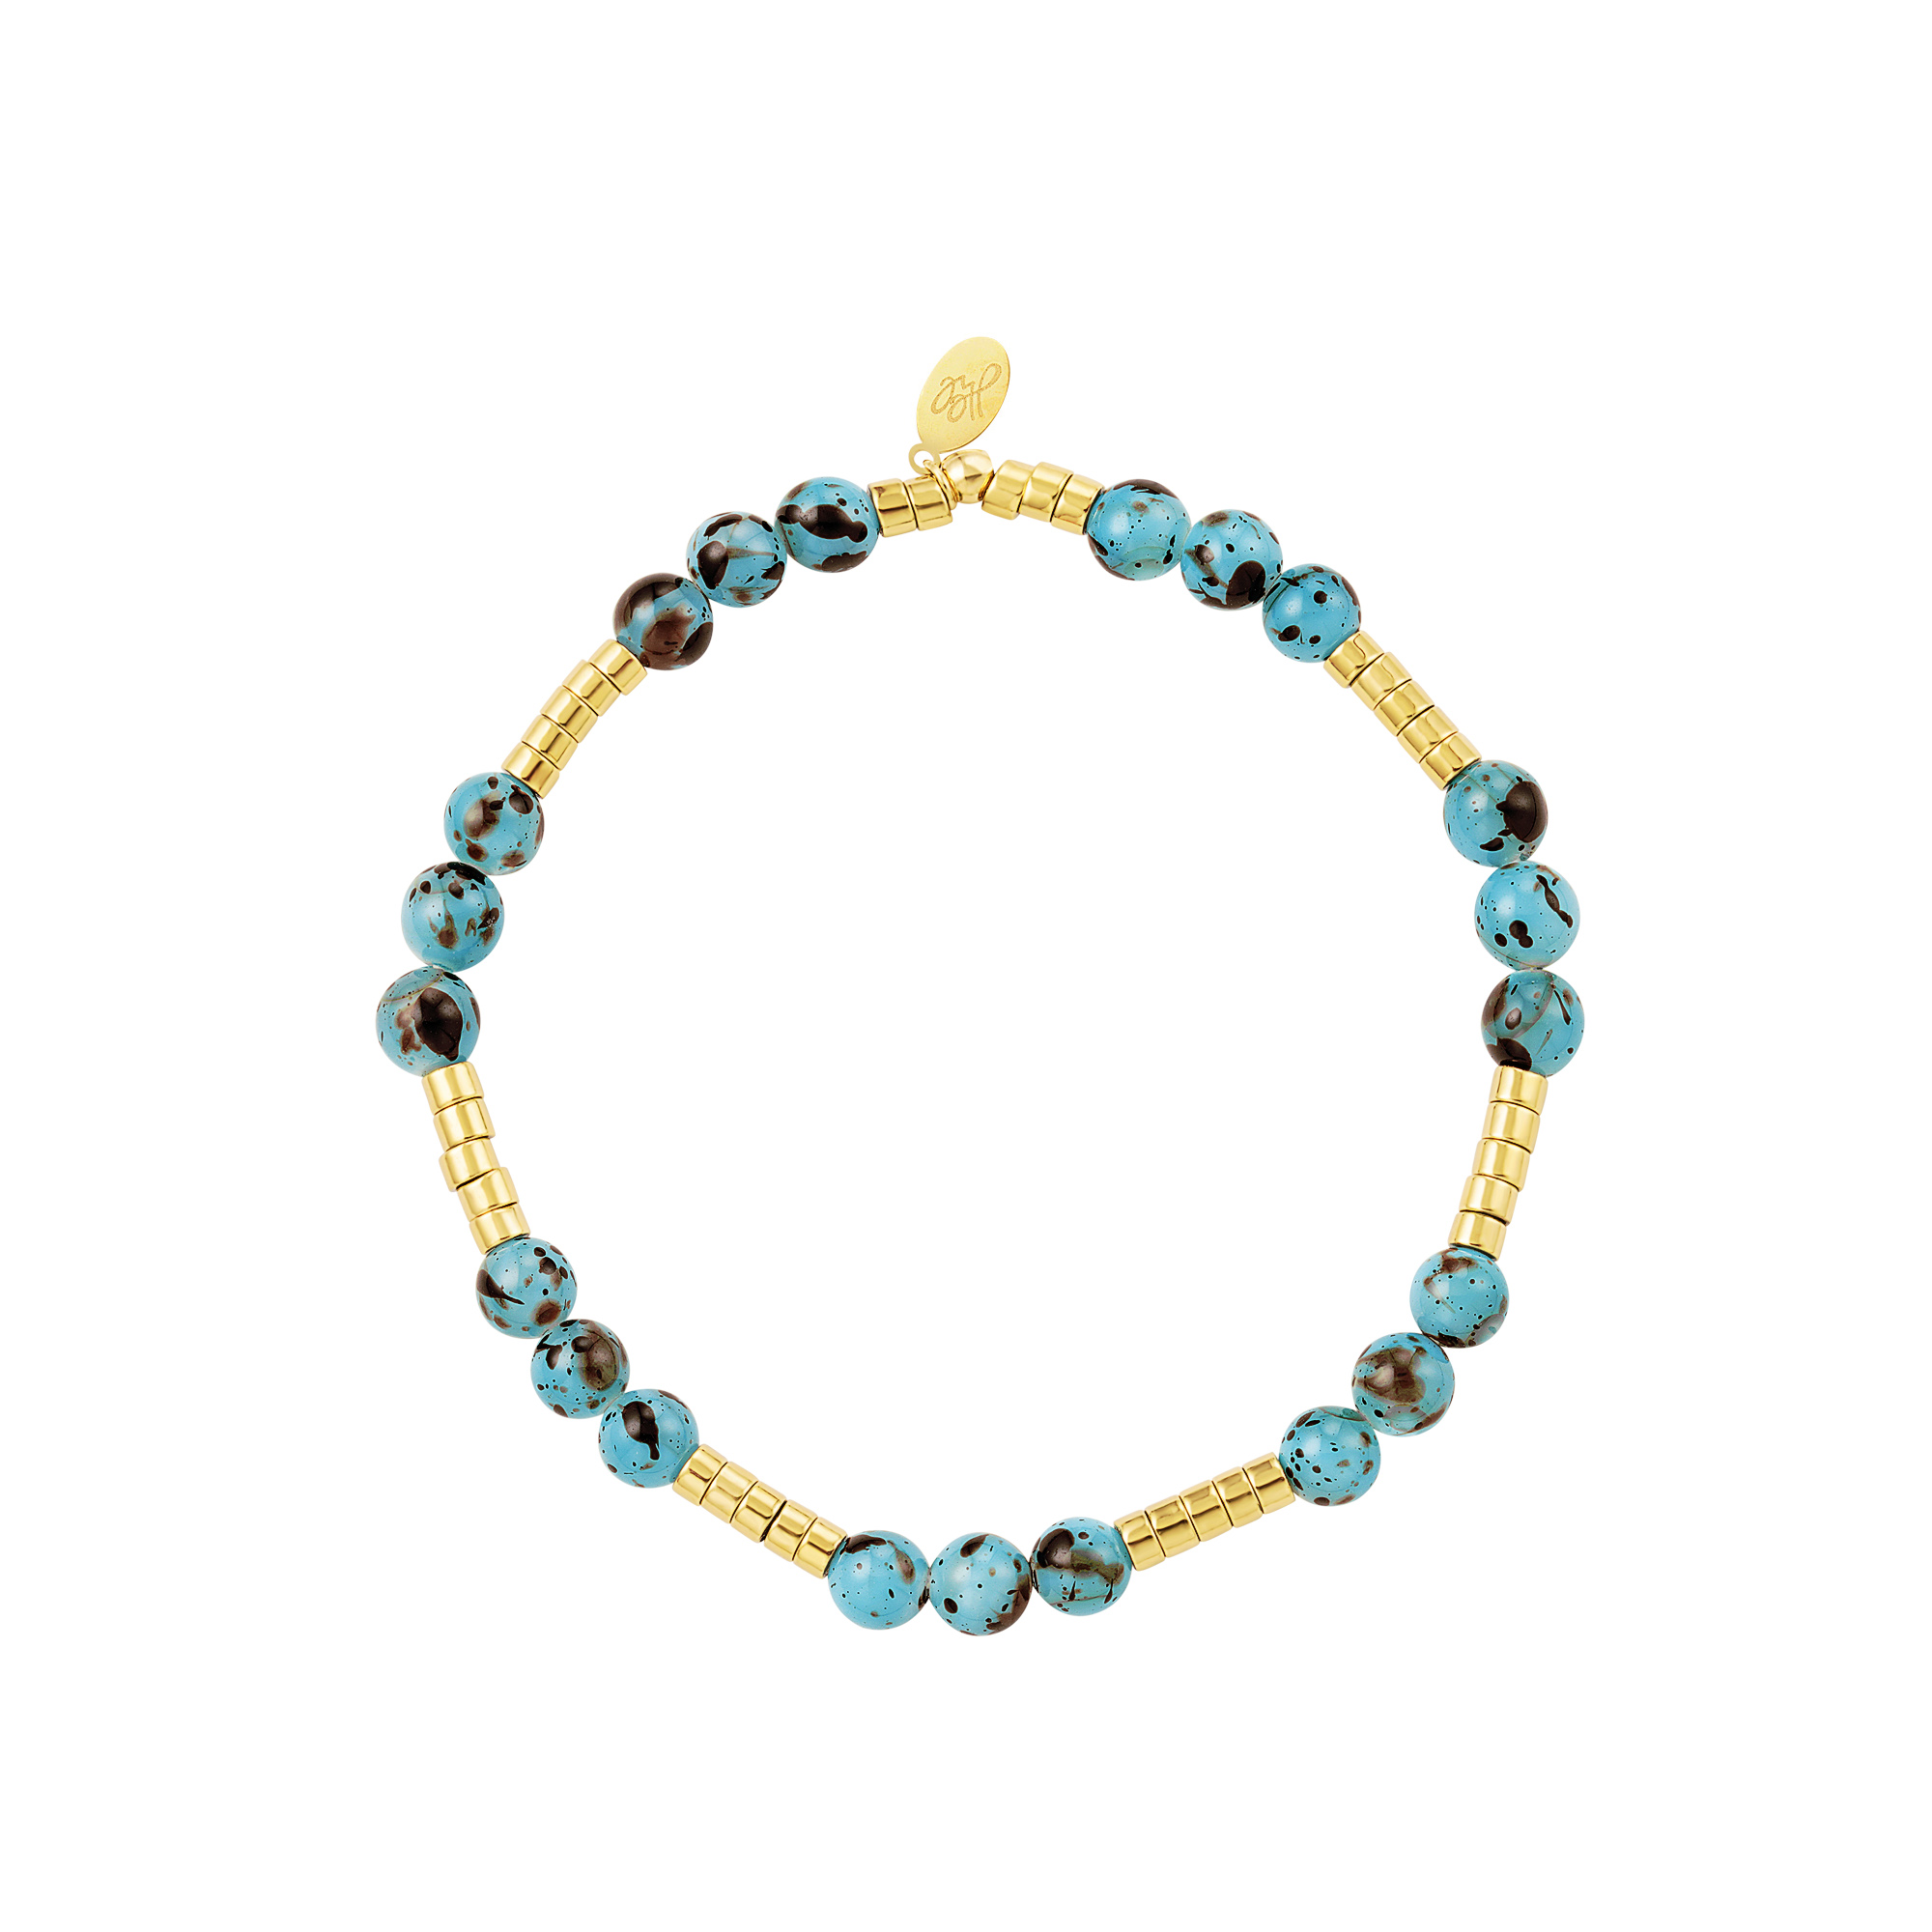 Beaded bracelet with blue natural stone